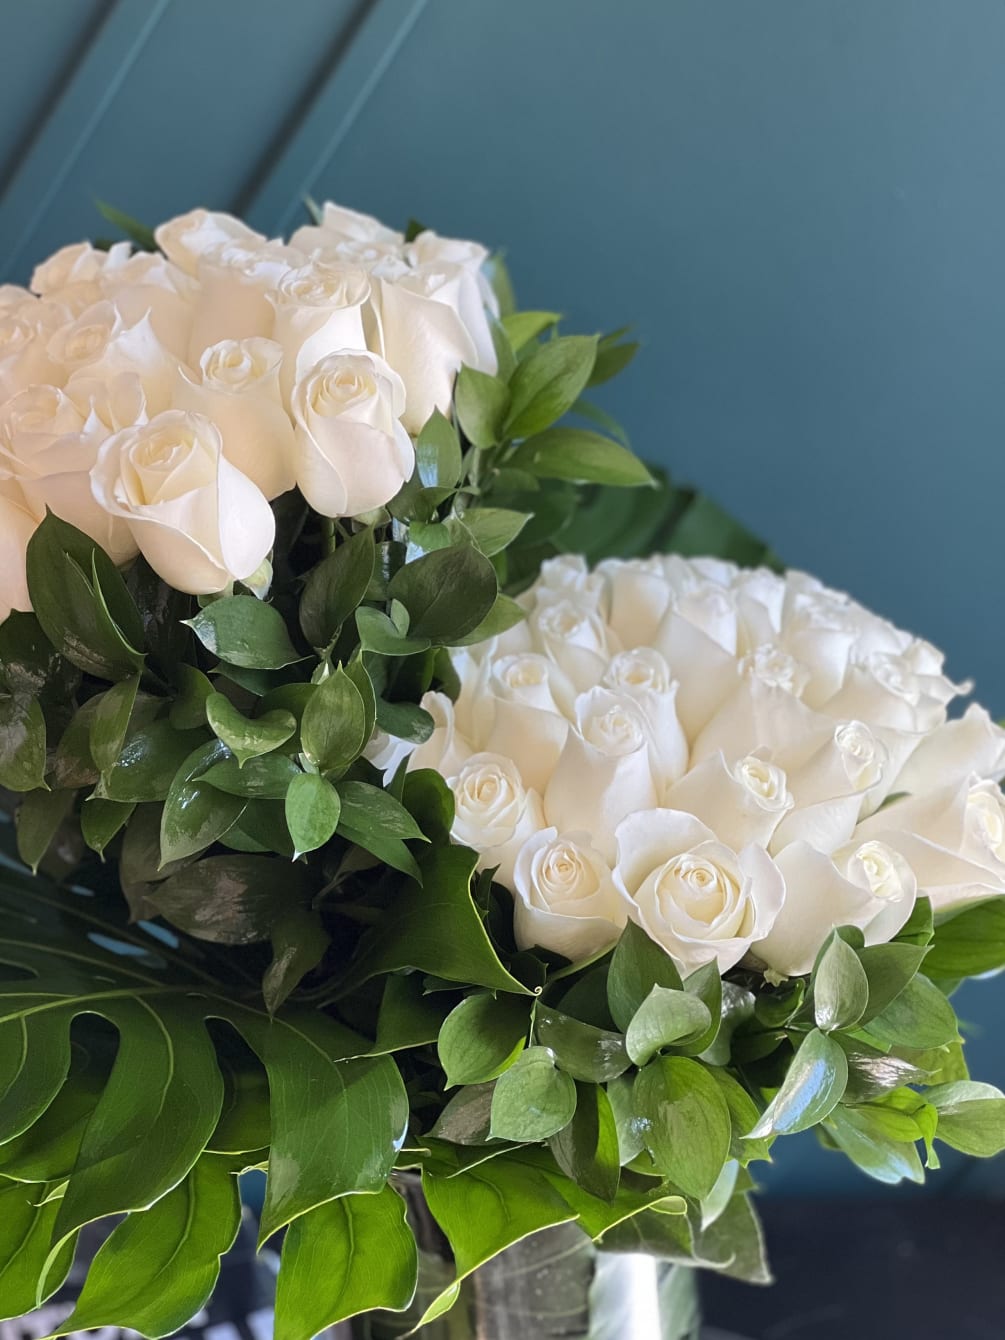 50 white roses design with greenery in a vase 